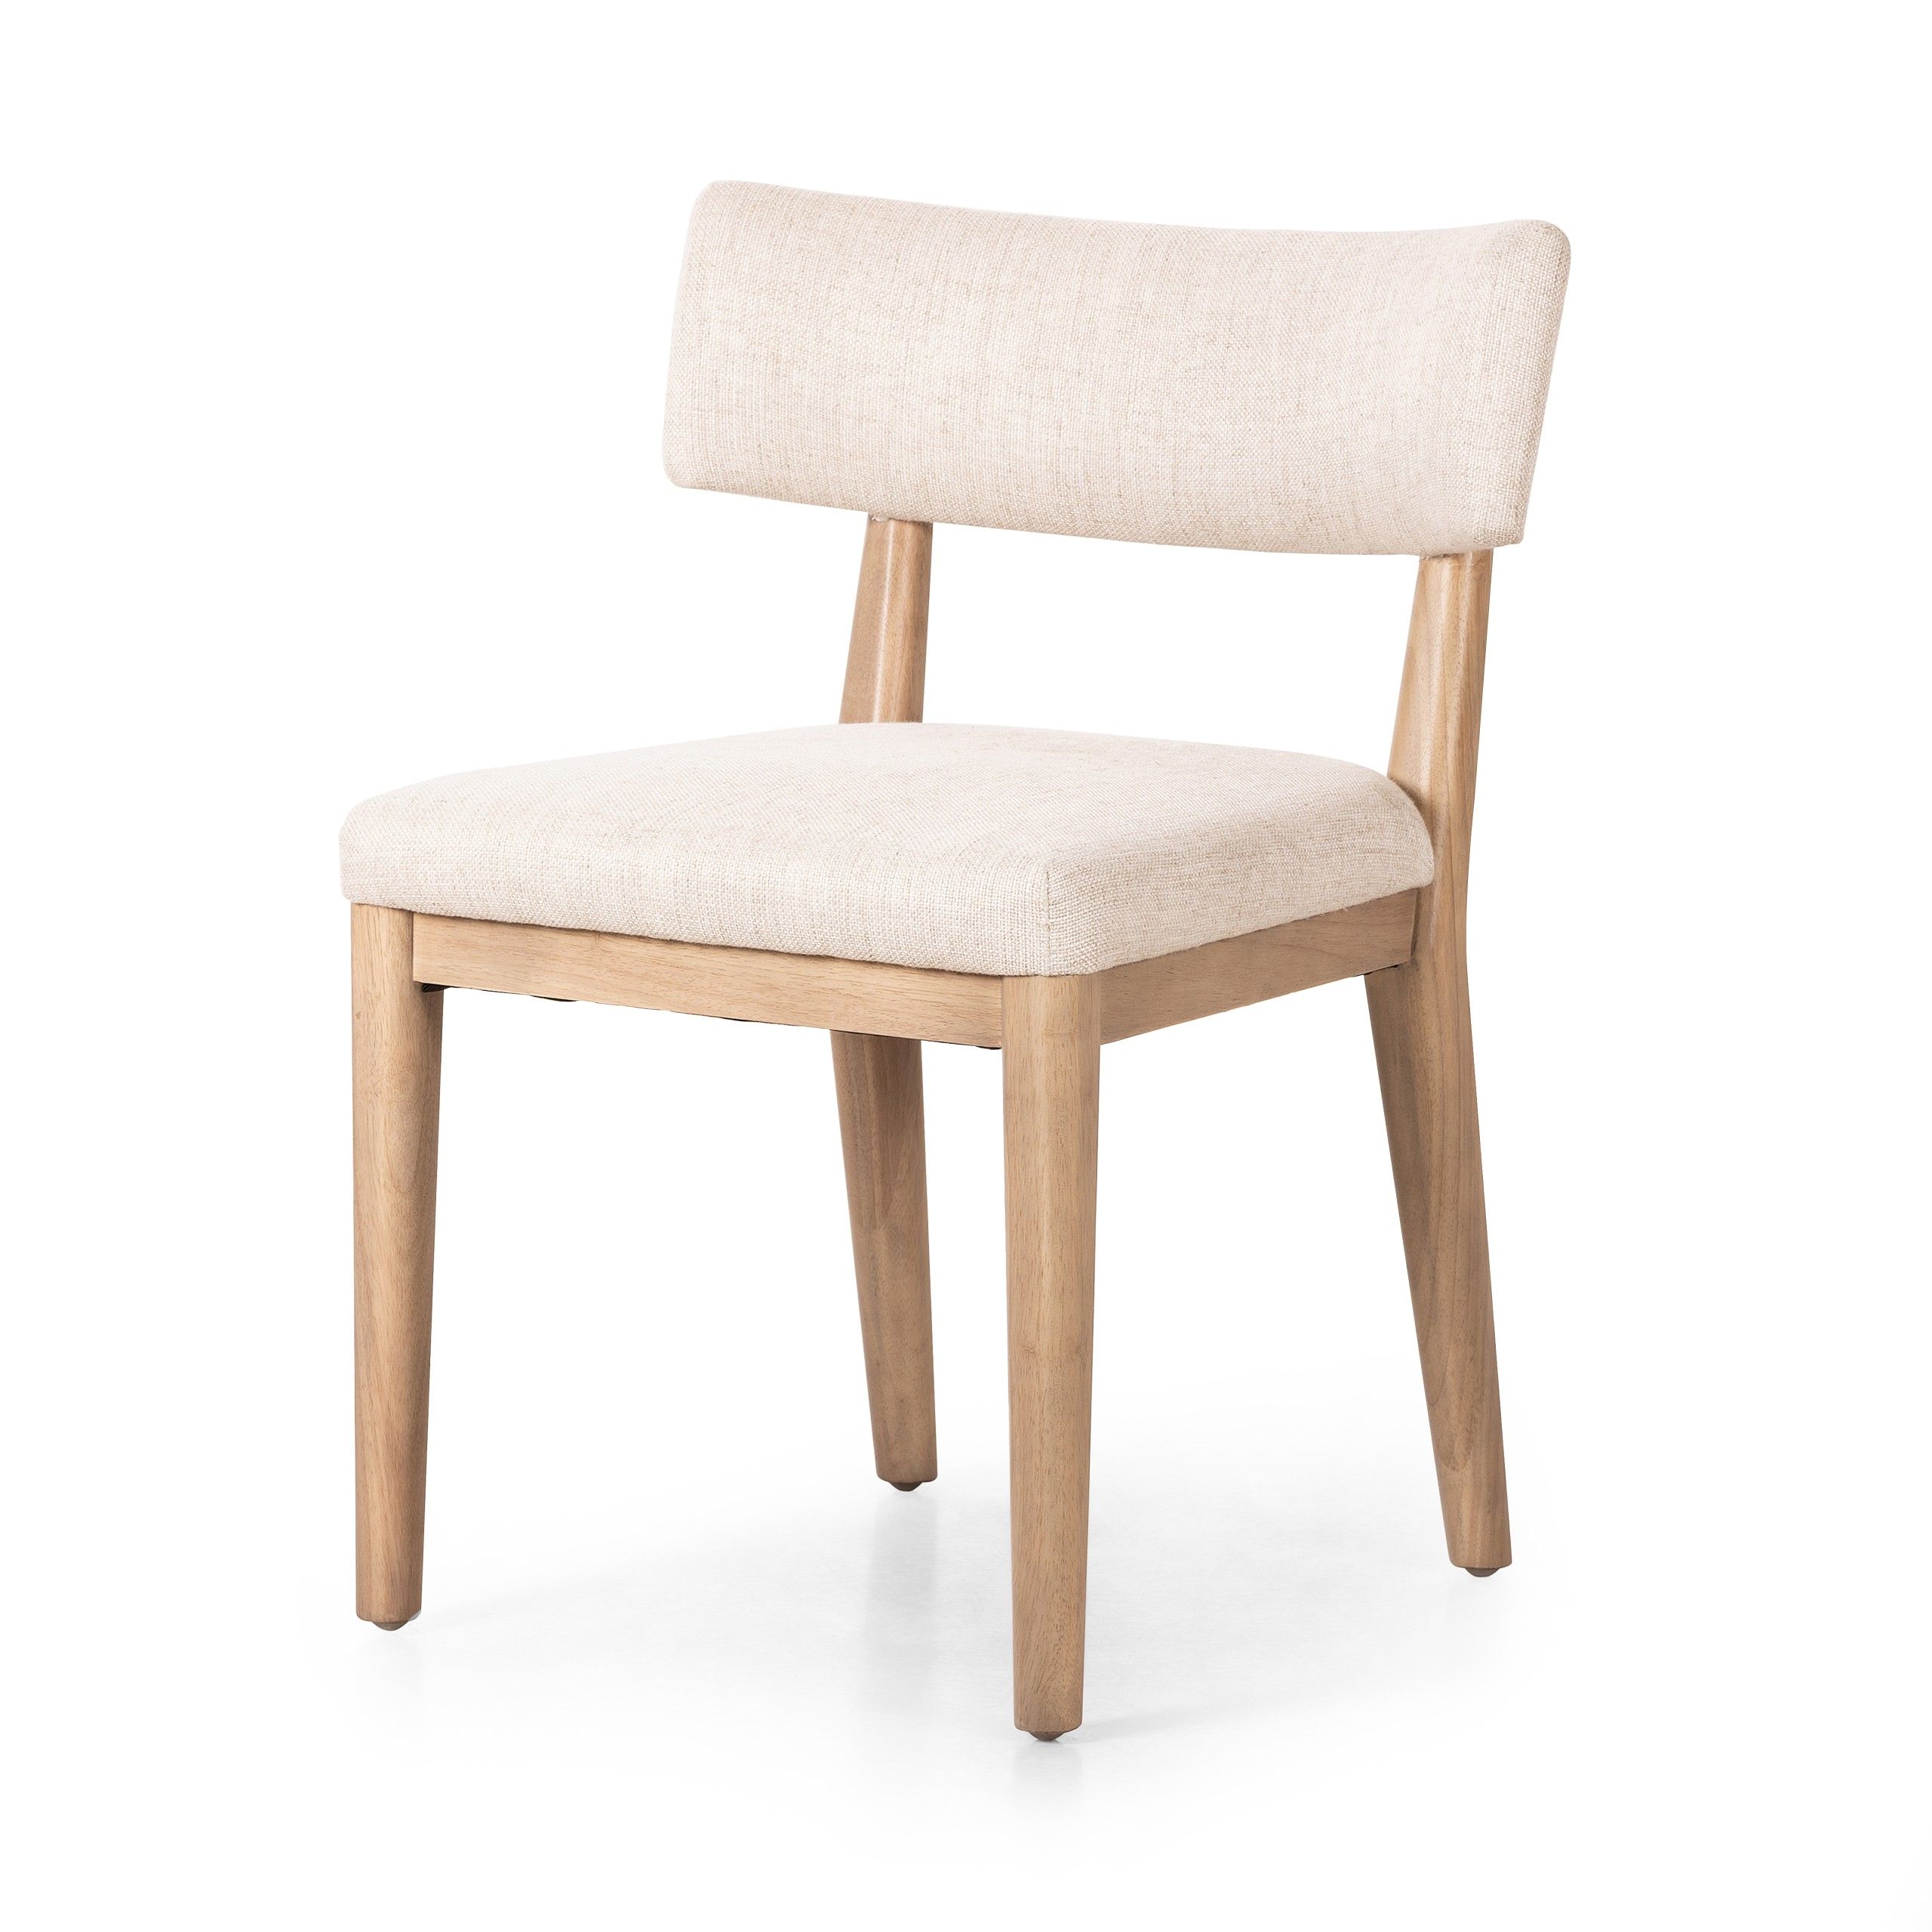 Cardell Dining Chair - Essence Natural